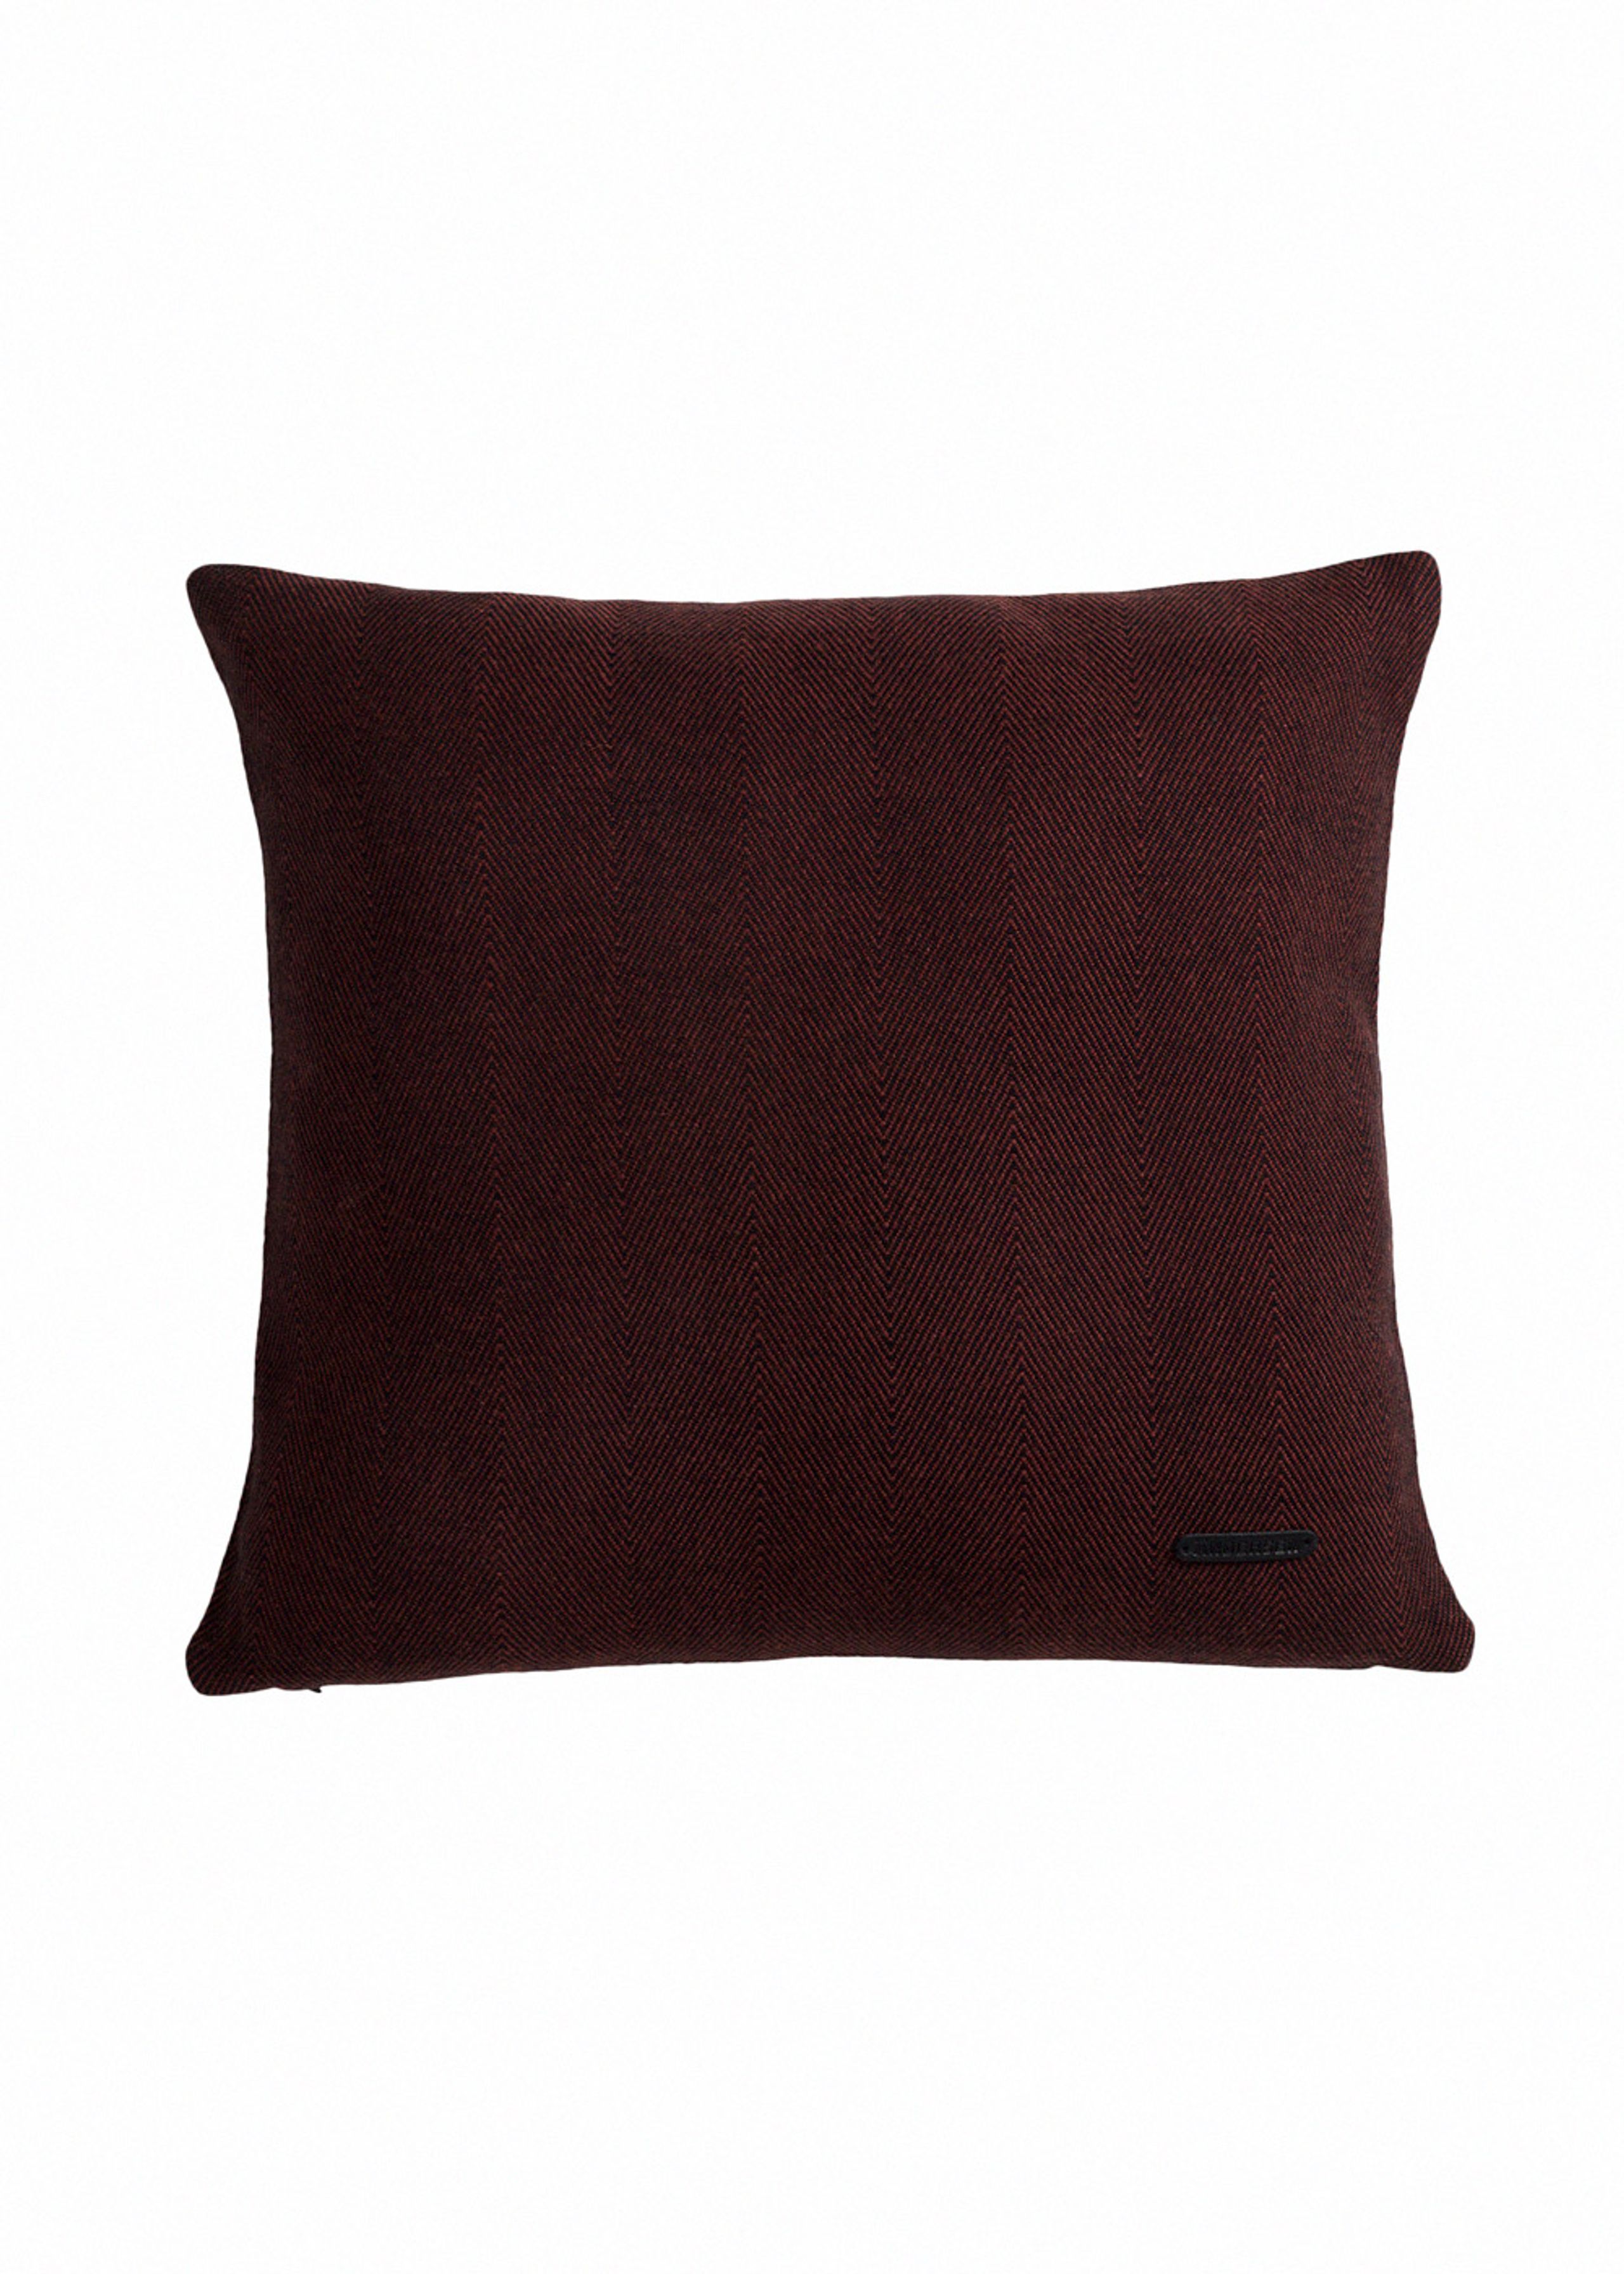 Andersen Furniture - Coussin - Twill Weave Cushion - Red - Small